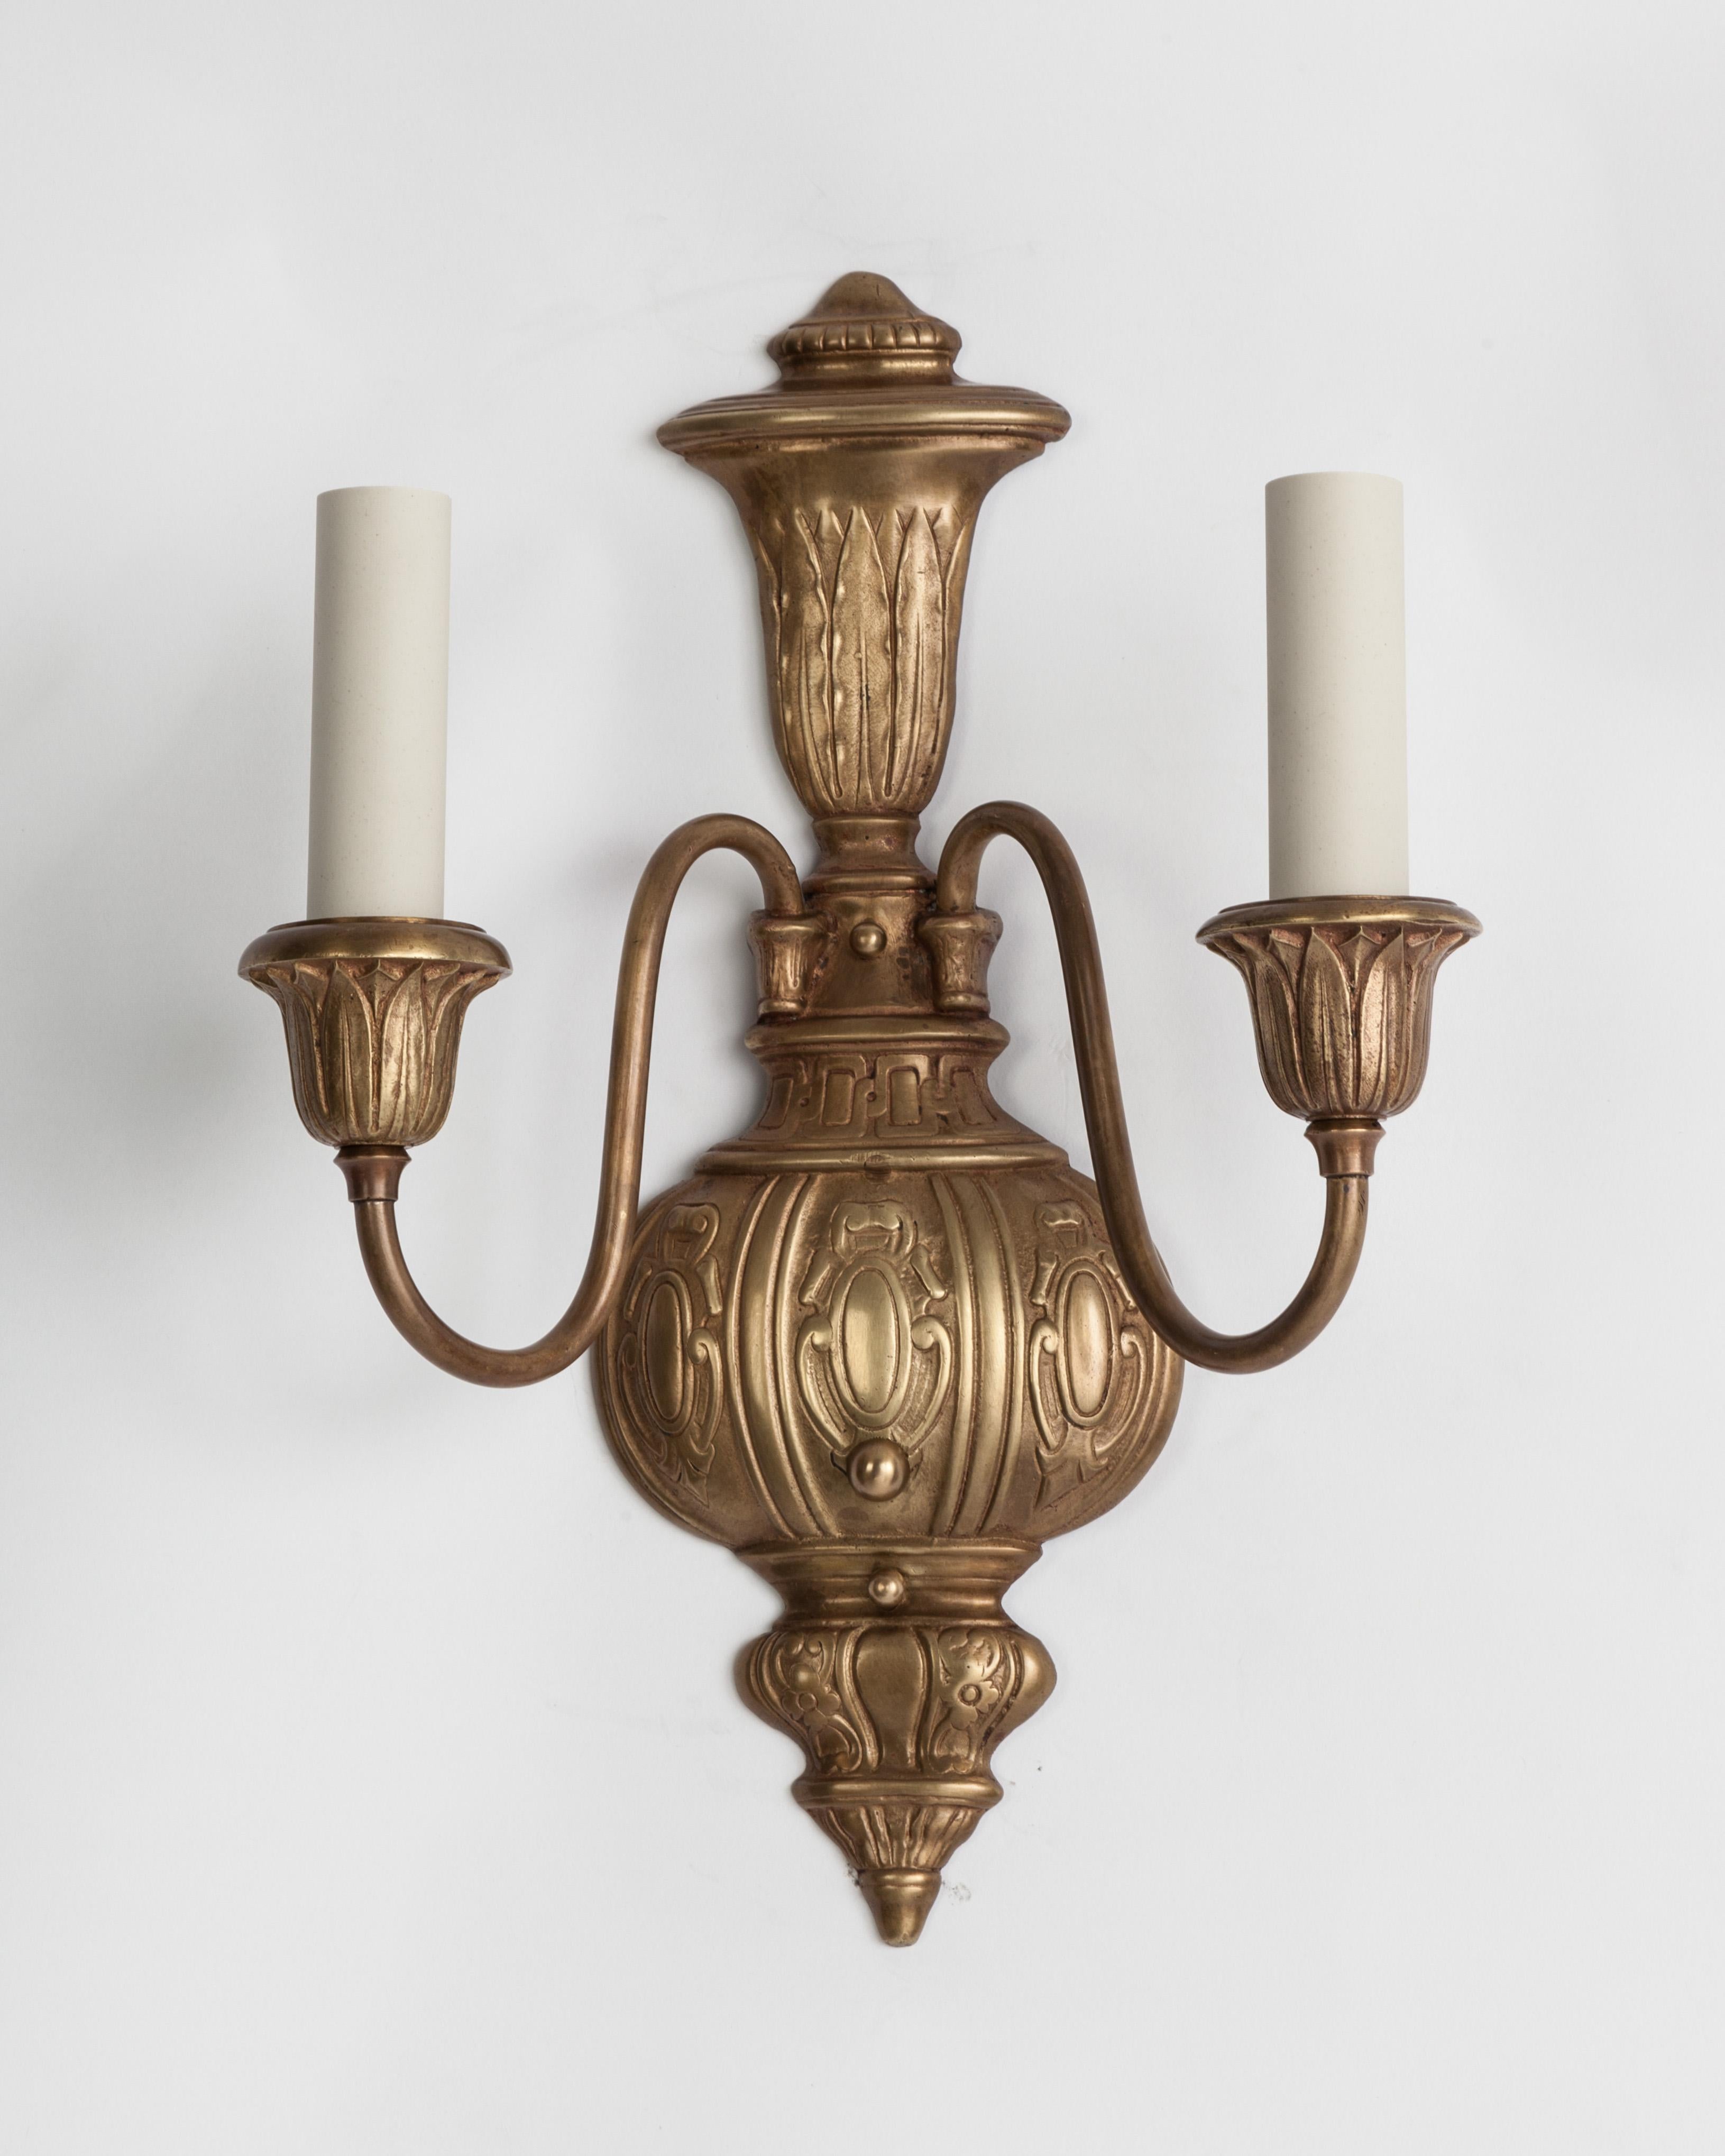 AIS2871

A pair of double-light sconces in a darkened bronze finish, circa 1920. The backplates are carved in low relief with cartouche and foliate details, and the ogee cups are wrapped with a leaf and dart.

Dimensions:
Overall 13